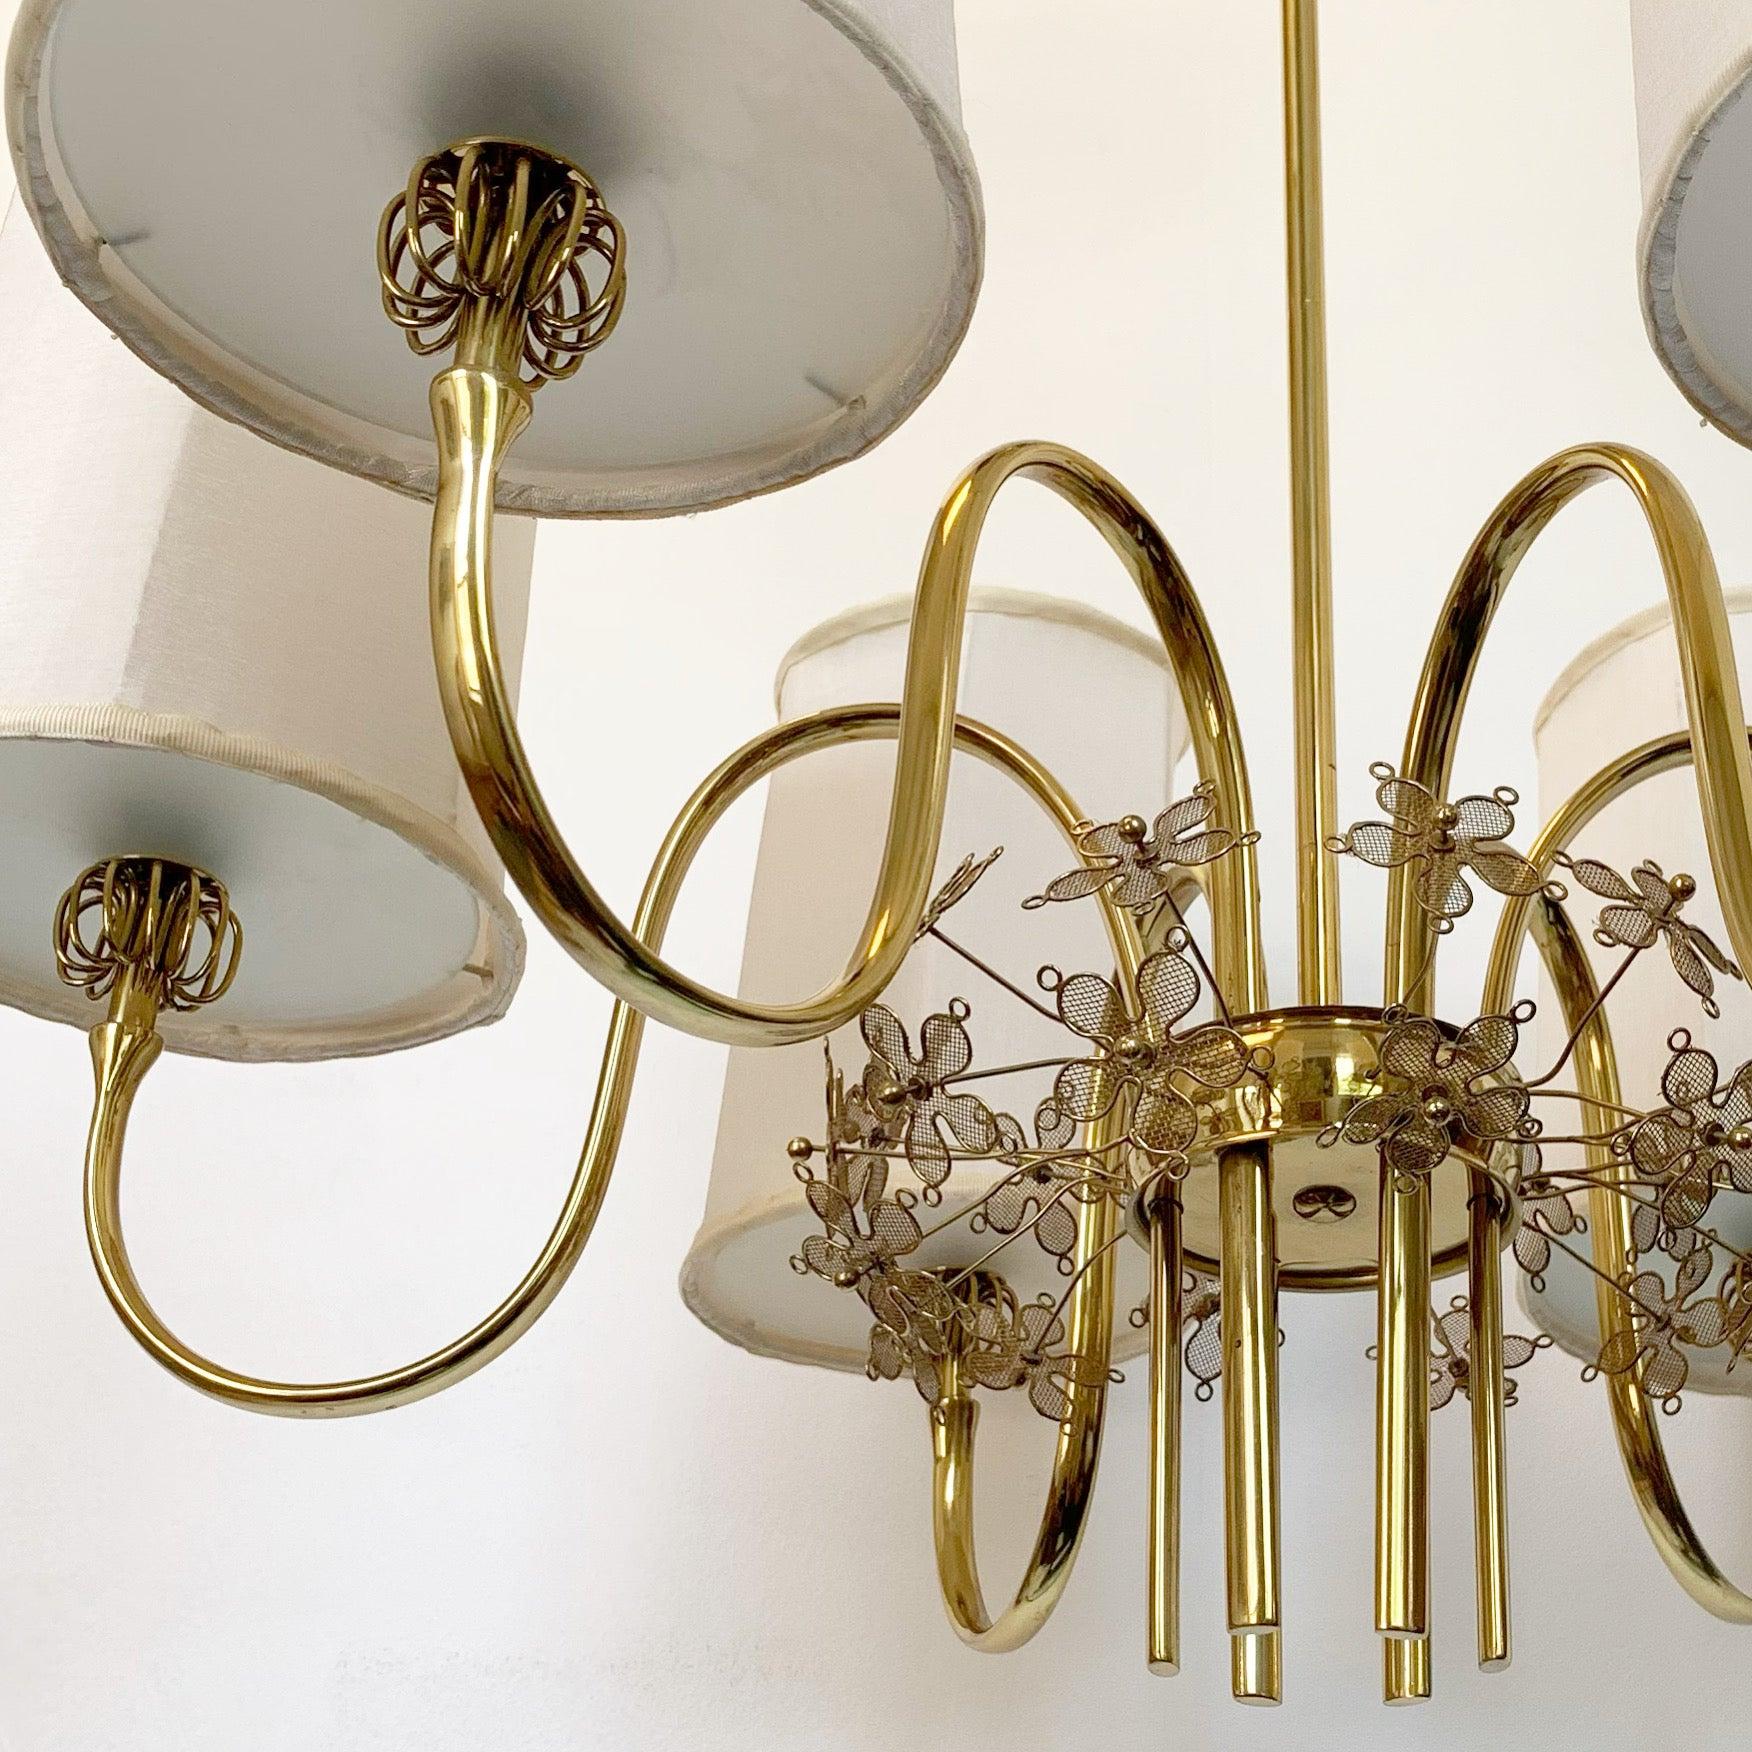 Paavo Tynell 

Chandelier Model 9013

Taito Oy

Finland 

1940s

28.25”H x 27.5”W

Brass, Frosted Glass, Silk

Originally purchased for a Pittsburgh area home designed by Architect Herbert Seigel. Expertly restored by Francis Nowalk.